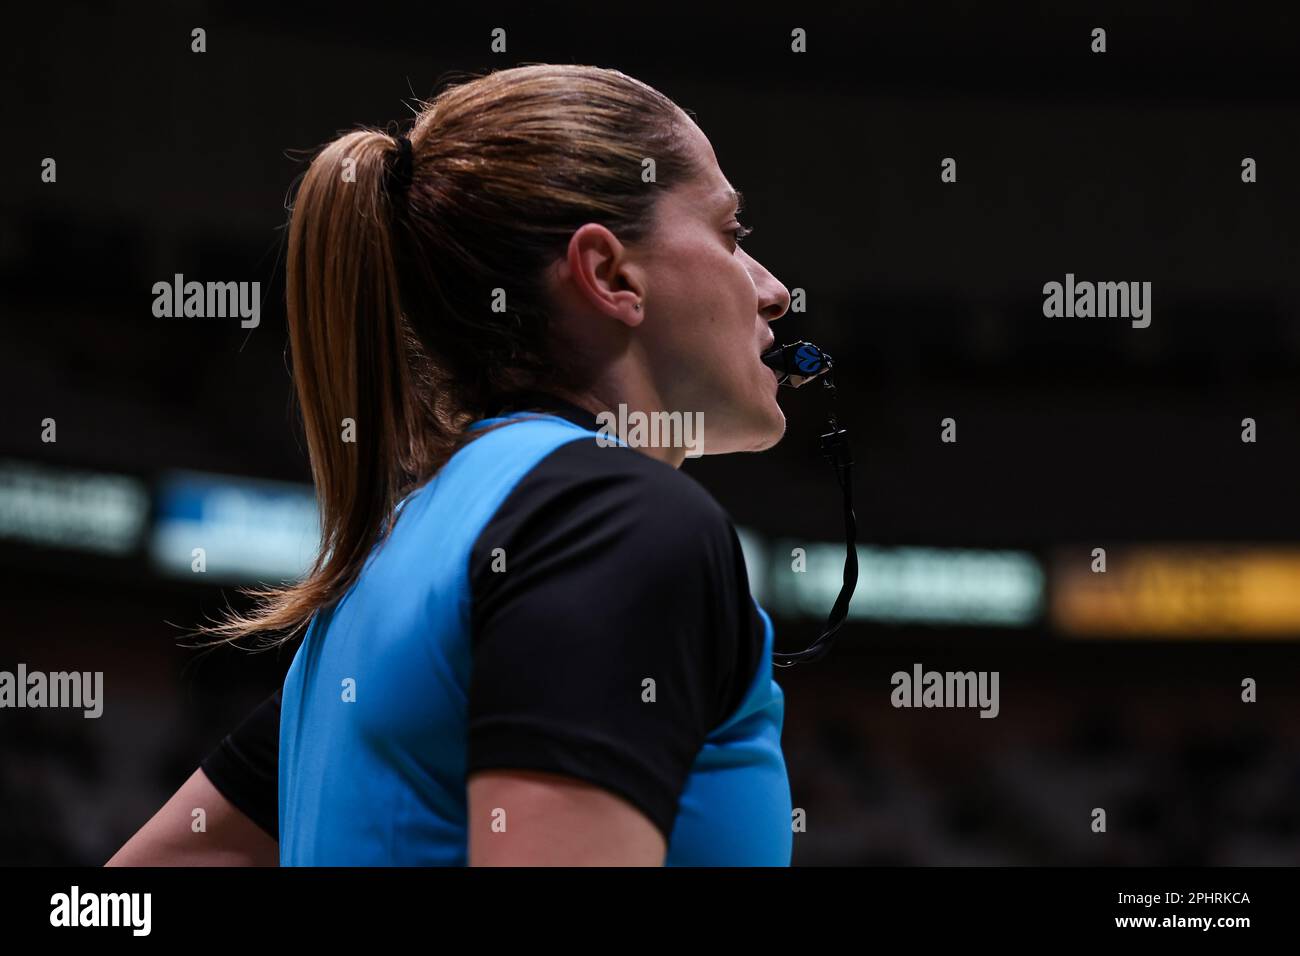 BARCELONA, SPAIN - MARCH 29: a referee during the Eurocup match between Joventut Badalona and 7Bet-Lietkabelis Panevezys at the Pavellon Olimpico de Badalona on March 29, 2023 in Barcelona, Spain (Photo by David Ramirez/DAX Images) Stock Photo